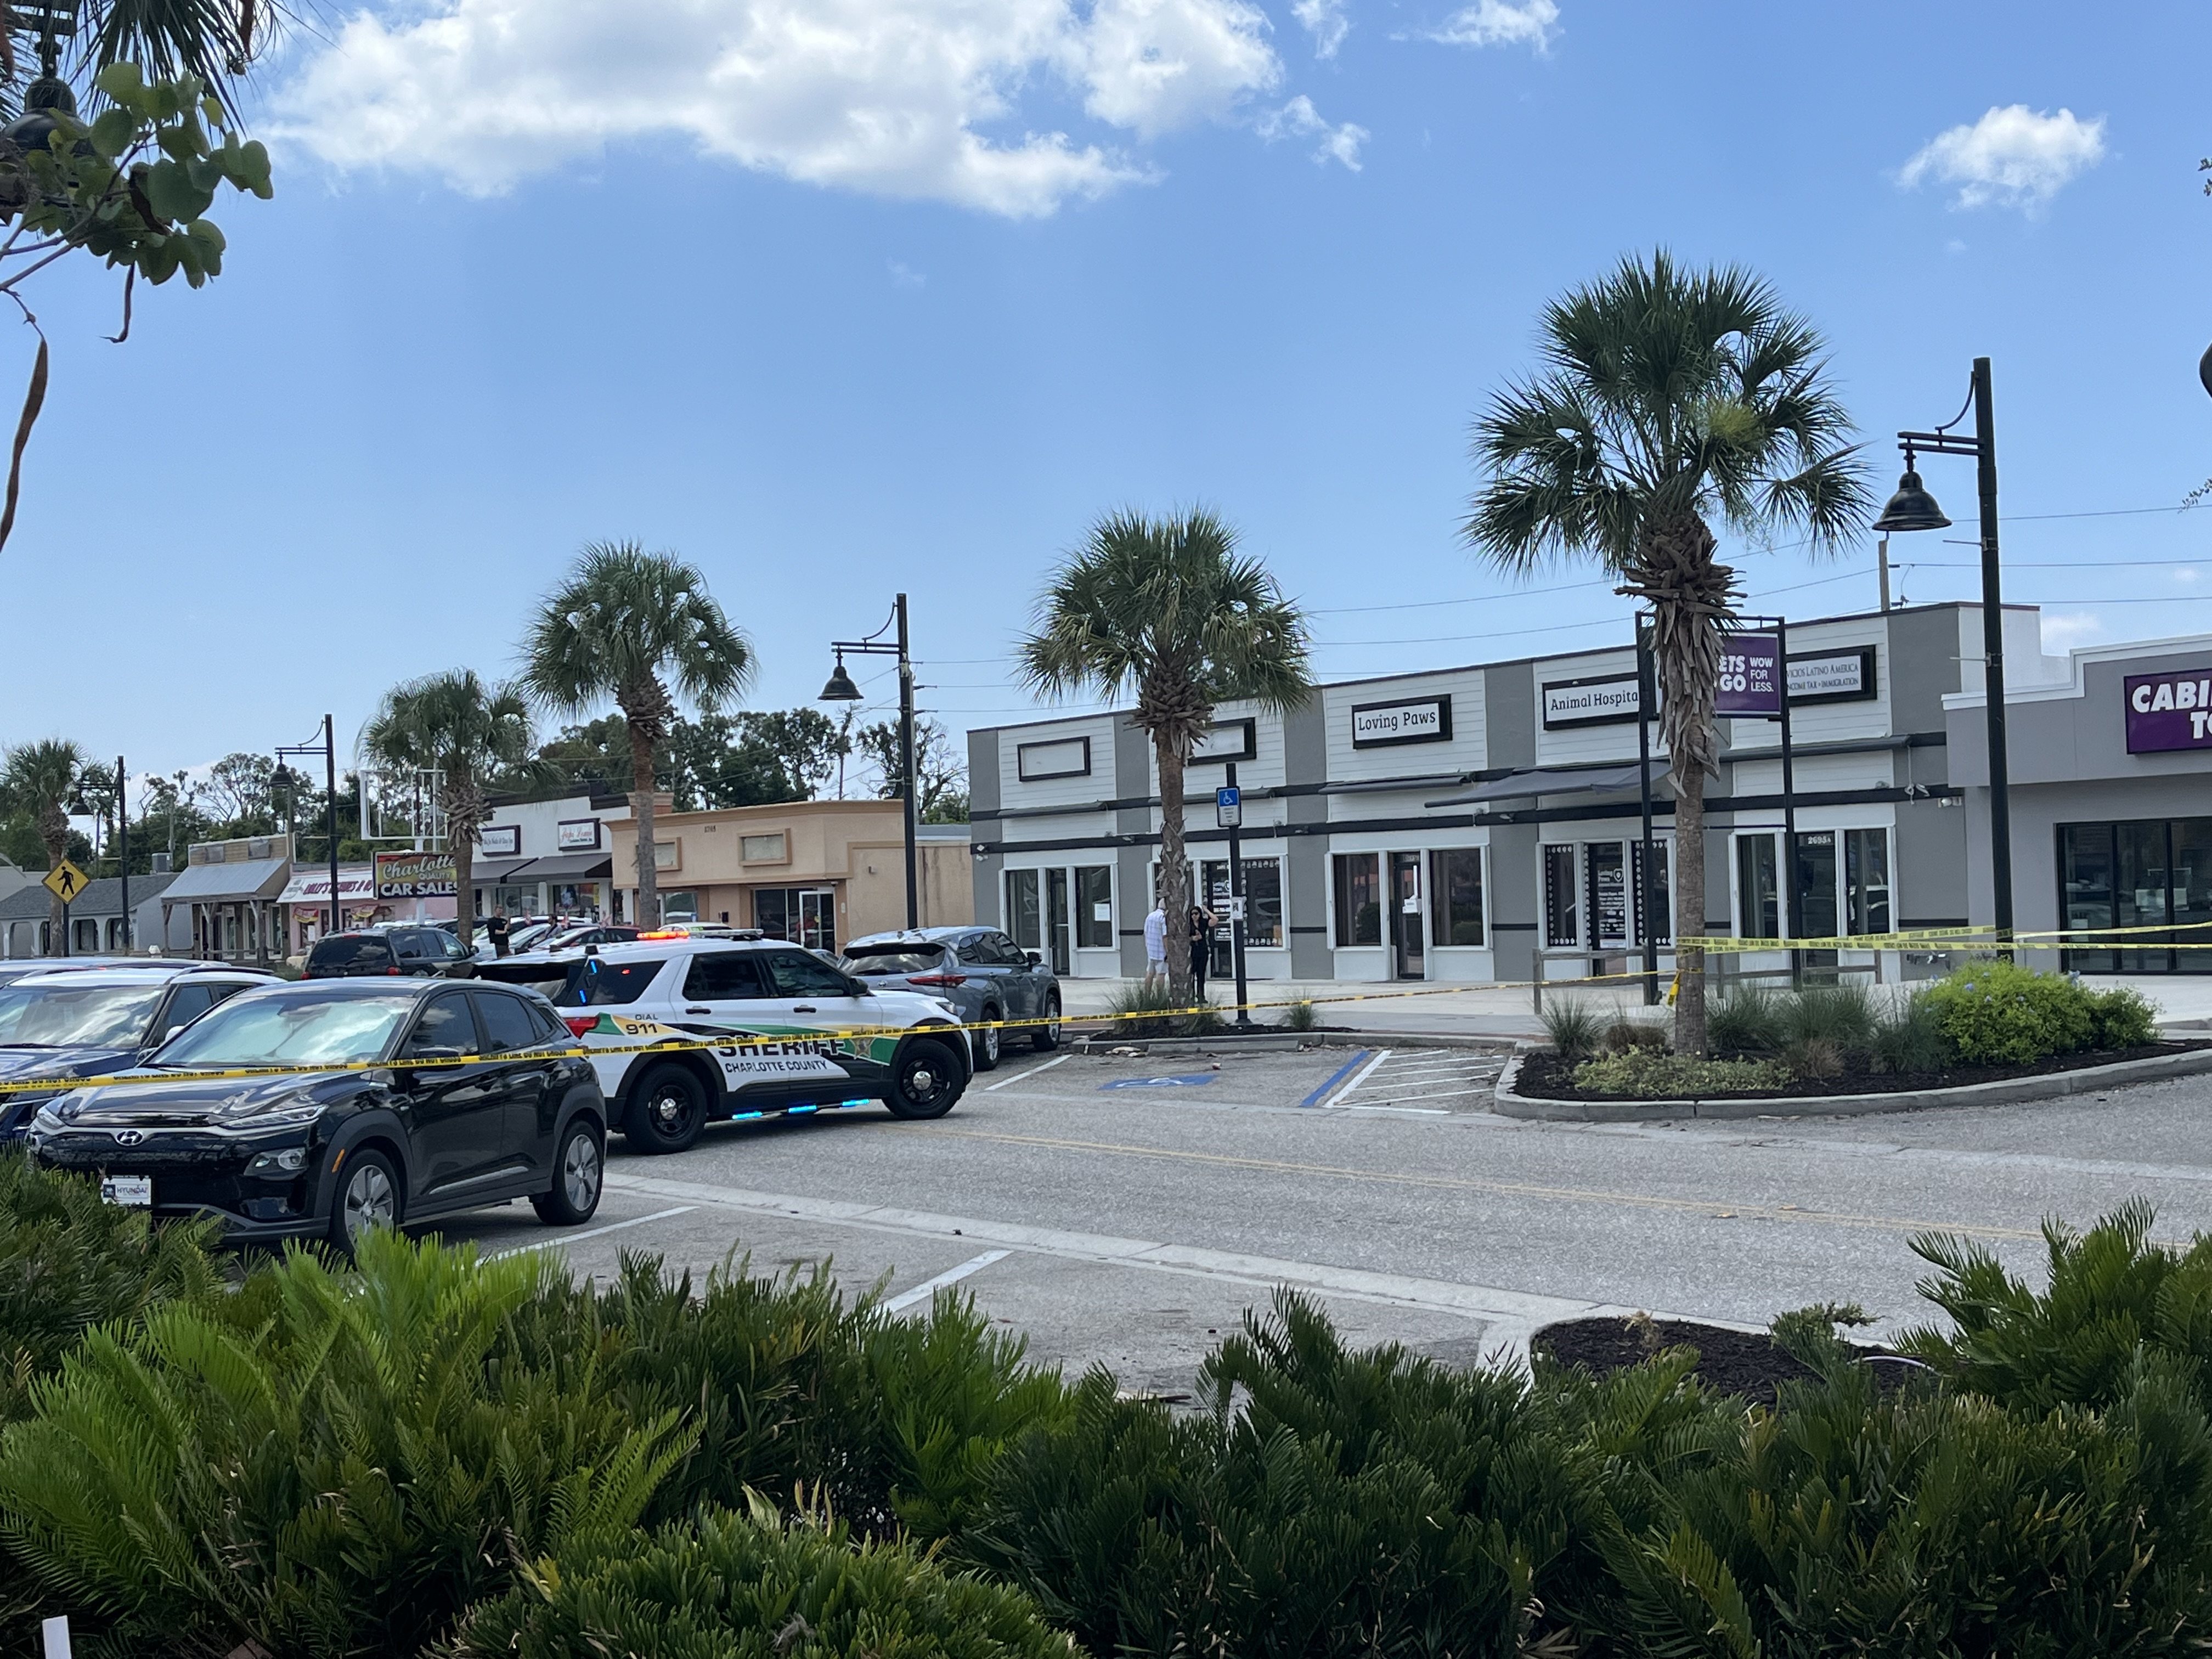 Investigation underway for active armed robbery at business in Charlotte County